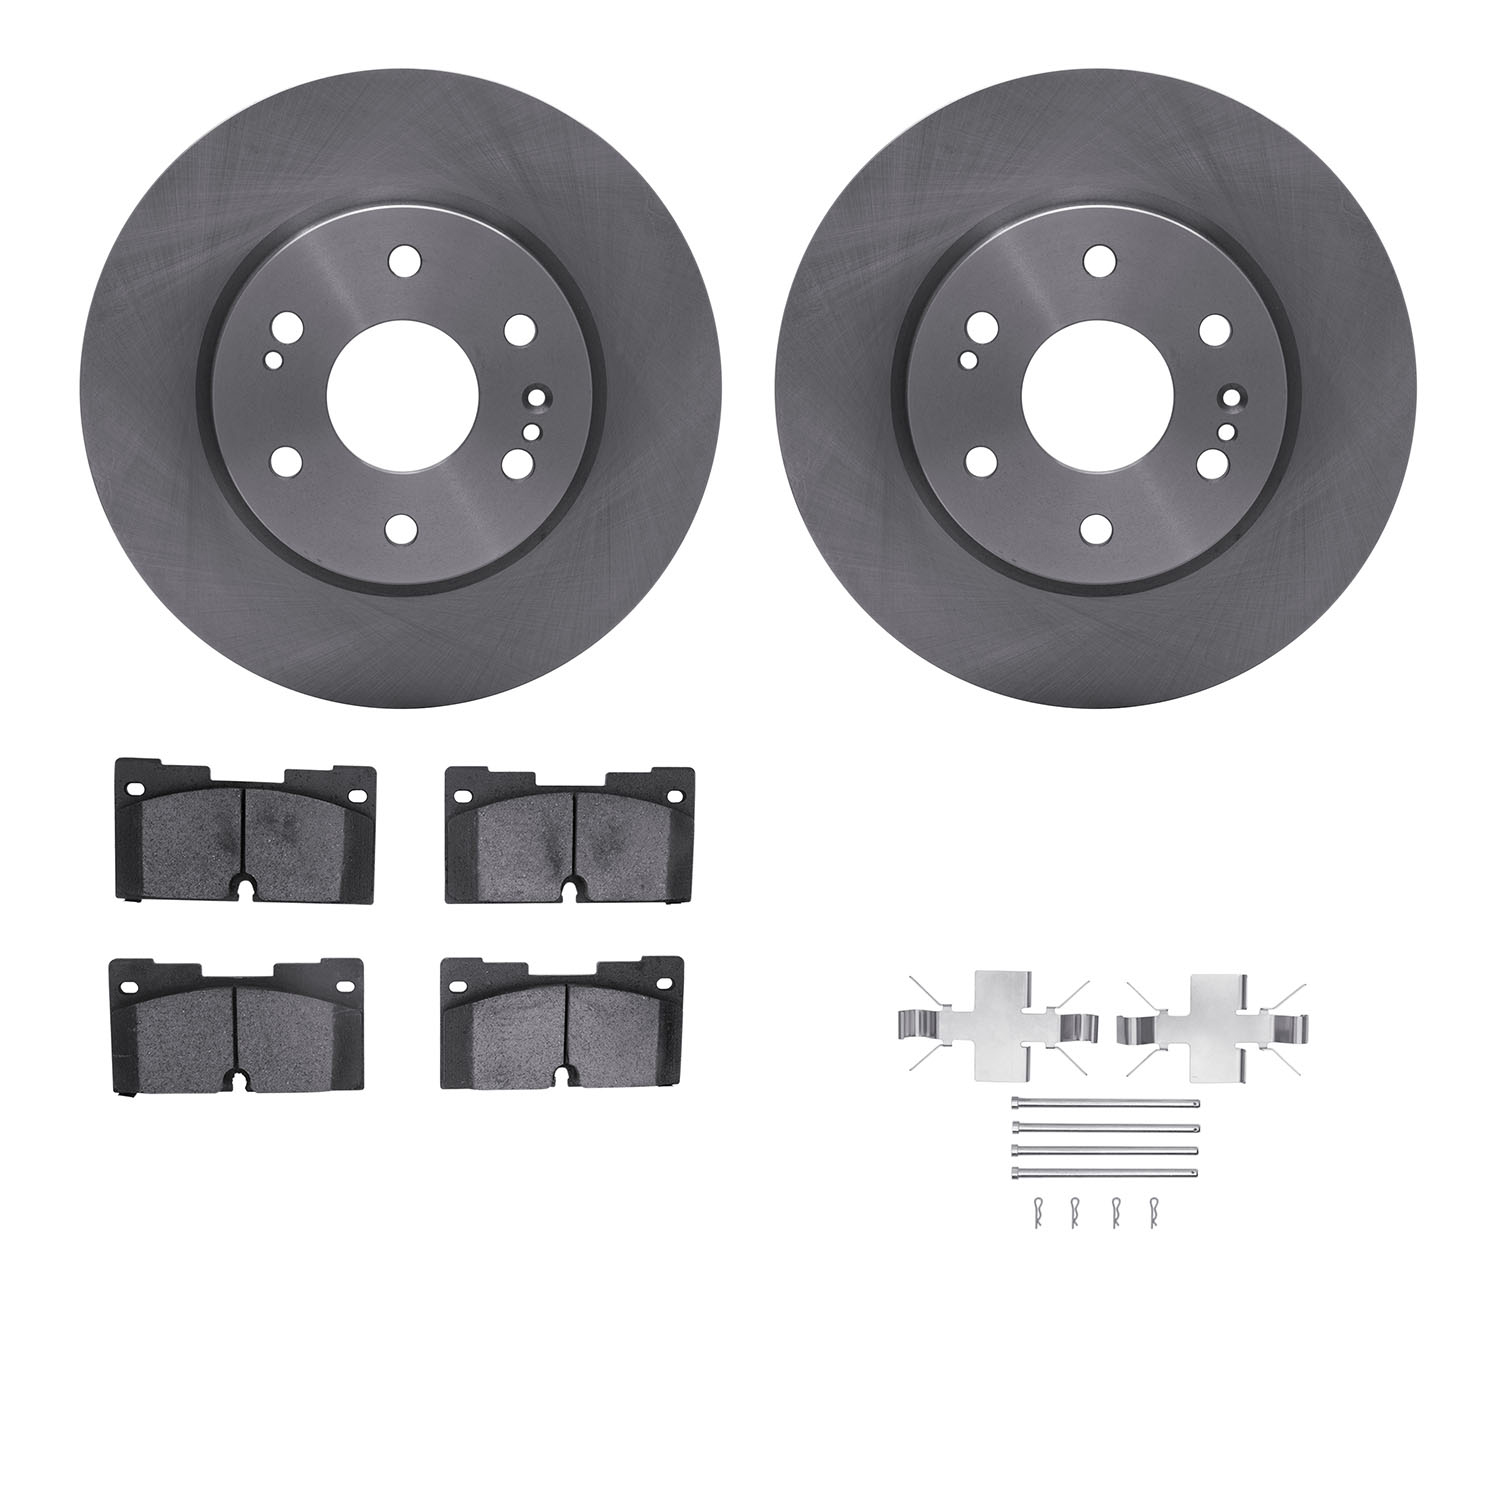 6412-47046 Brake Rotors with Ultimate-Duty Brake Pads Kit & Hardware, Fits Select GM, Position: Front